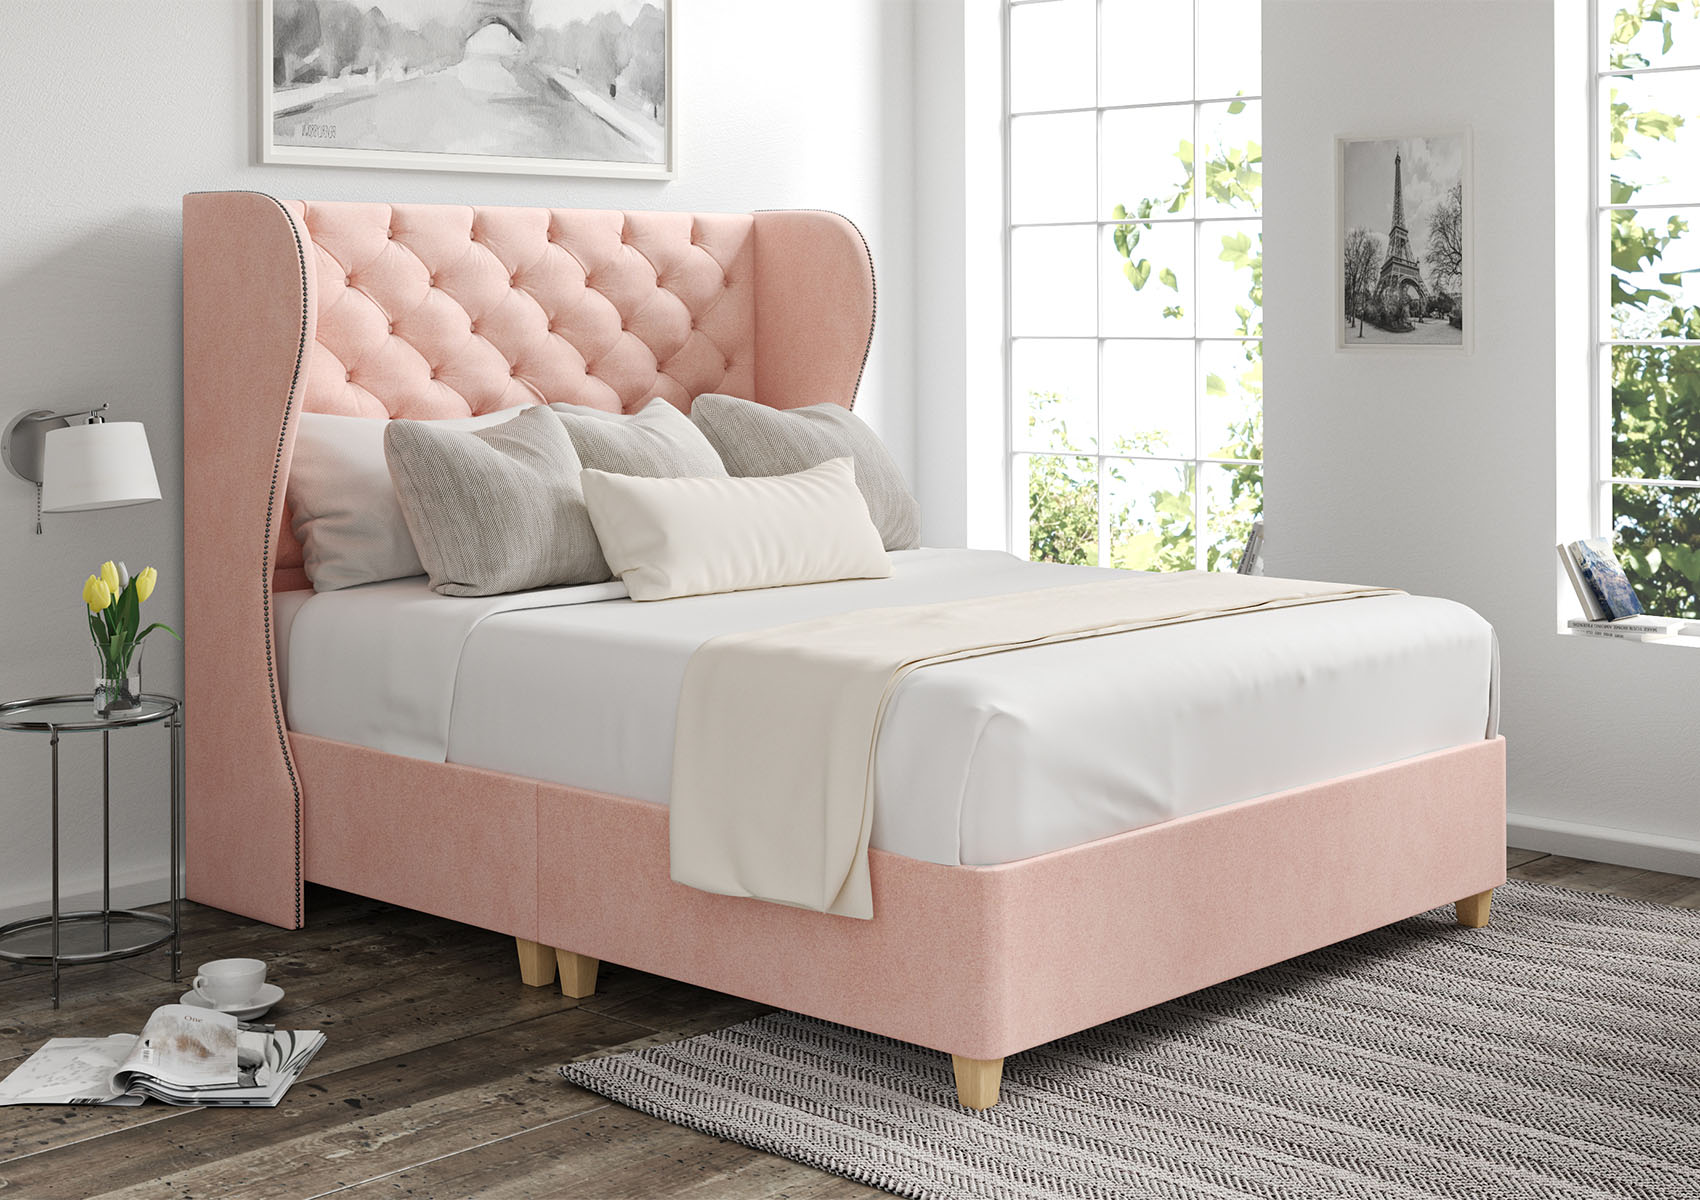 View Miami Arlington Ice Upholstered Double Winged Bed Time4Sleep information